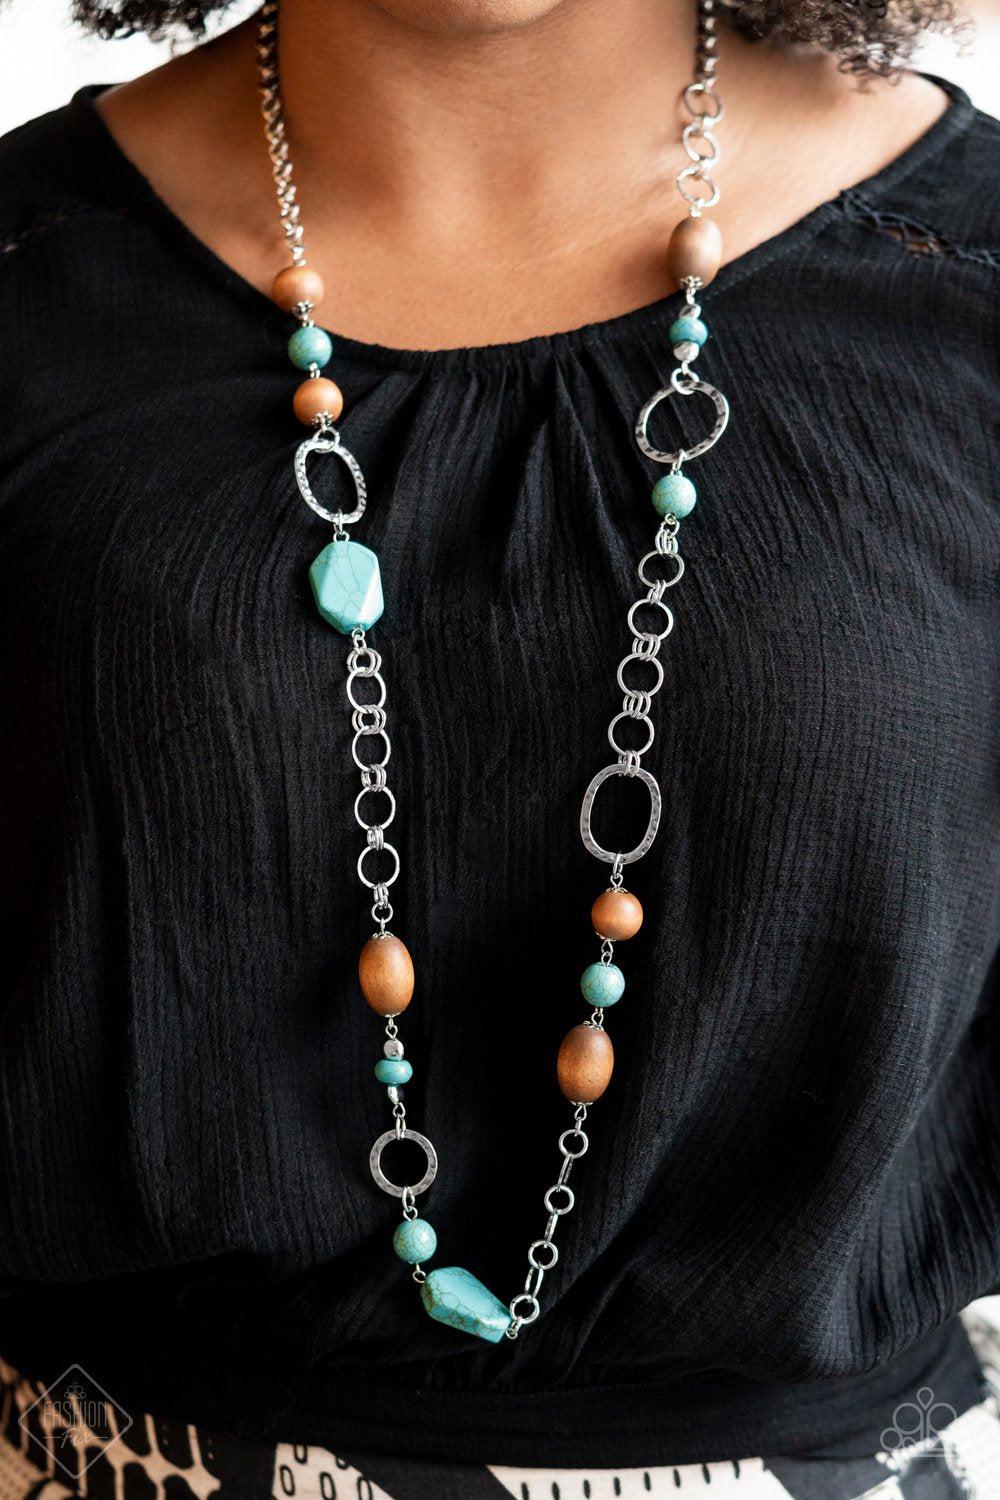 Prairie Reserve Turquoise Blue Stone, Wood Bead and Silver Necklace - Paparazzi Accessories- model - CarasShop.com - $5 Jewelry by Cara Jewels